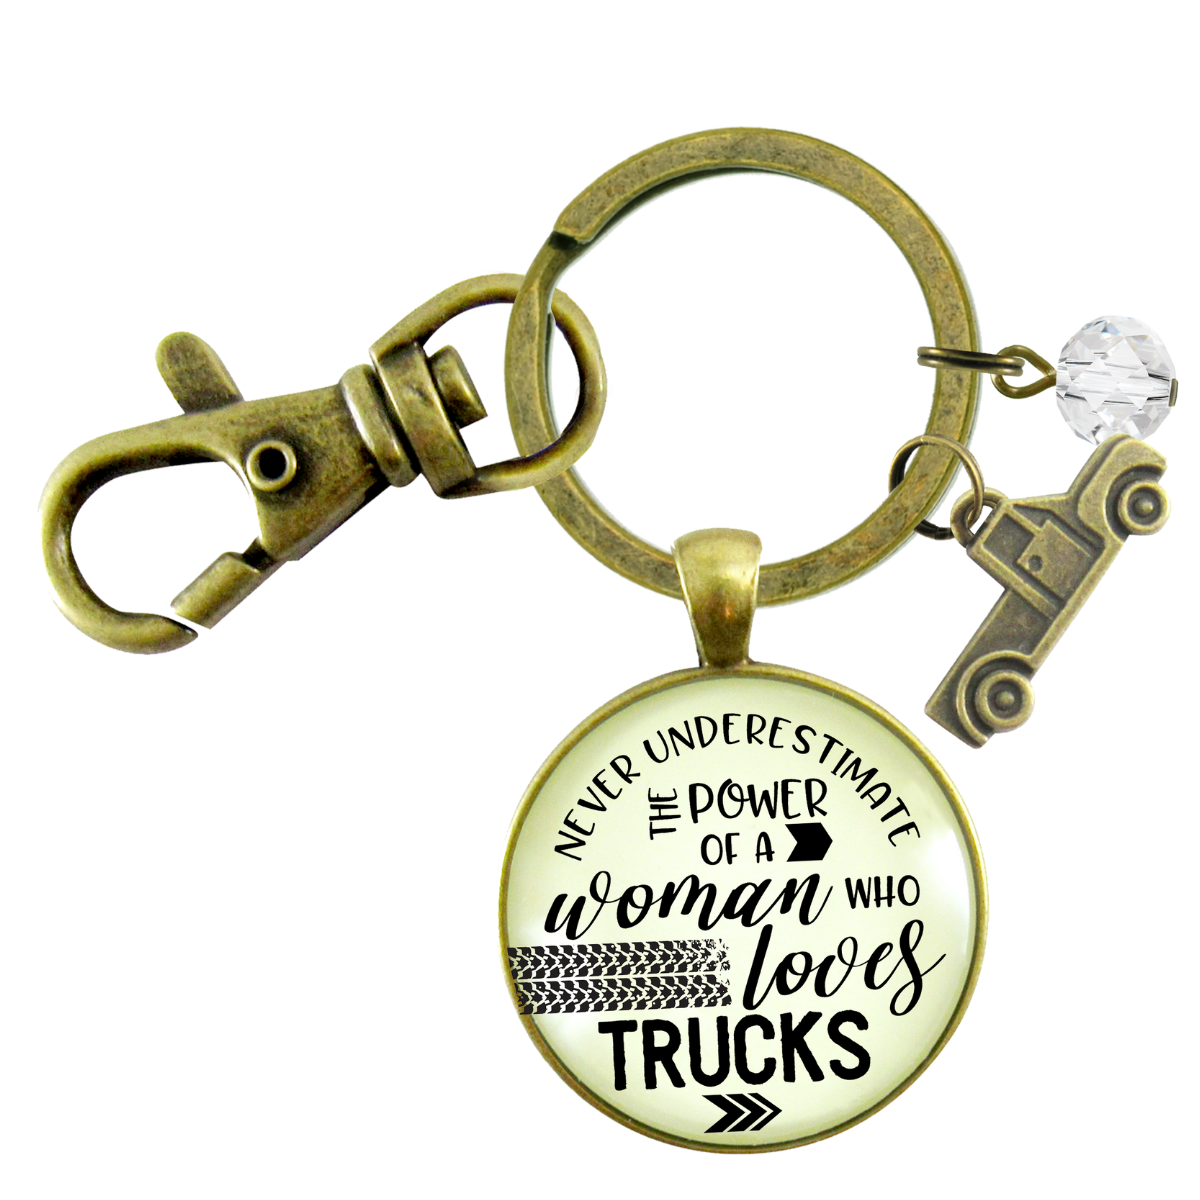 Truck Charm Keychain Never Underestimate Woman Loves Country Jewelry - Gutsy Goodness Handmade Jewelry;Truck Charm Keychain Never Underestimate Woman Loves Country Jewelry - Gutsy Goodness Handmade Jewelry Gifts